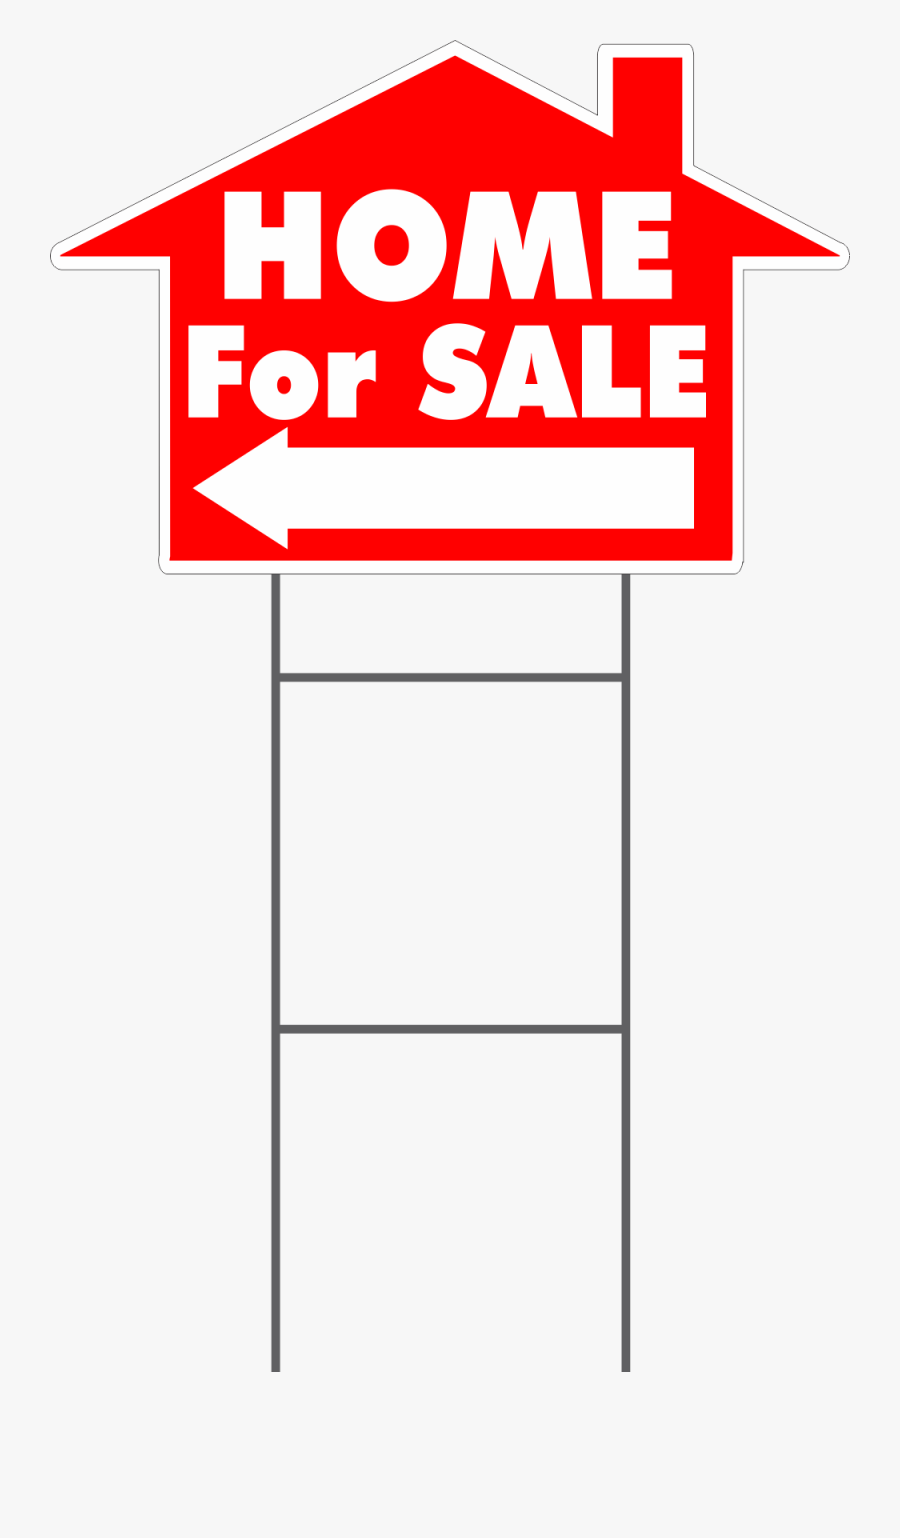 Home For Sale House Shaped Yard Sign Clipart , Png - Safety Banner, Transparent Clipart